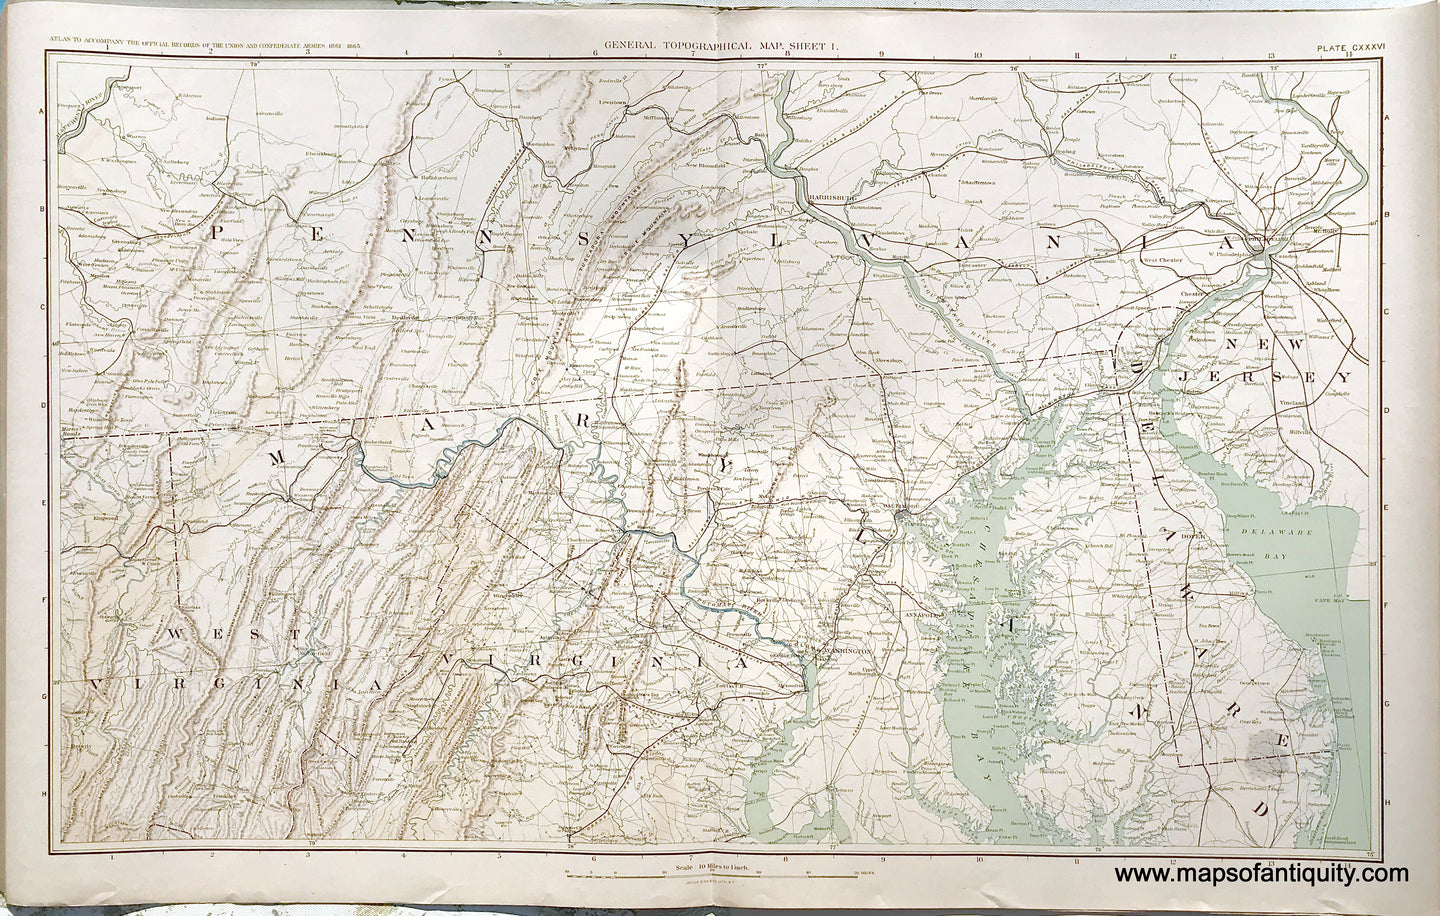 Antique-Lithograph-Print-Plate-136.-General-Topographical-Map.-Sheet-I.-Sections-of-Pennsylvania-Maryland-West-Virginia-Virginia-New-Jersey-and-Delaware.-1894-US-War-Dept.-Civil-War-Civil-War-1800s-19th-century-Maps-of-Antiquity